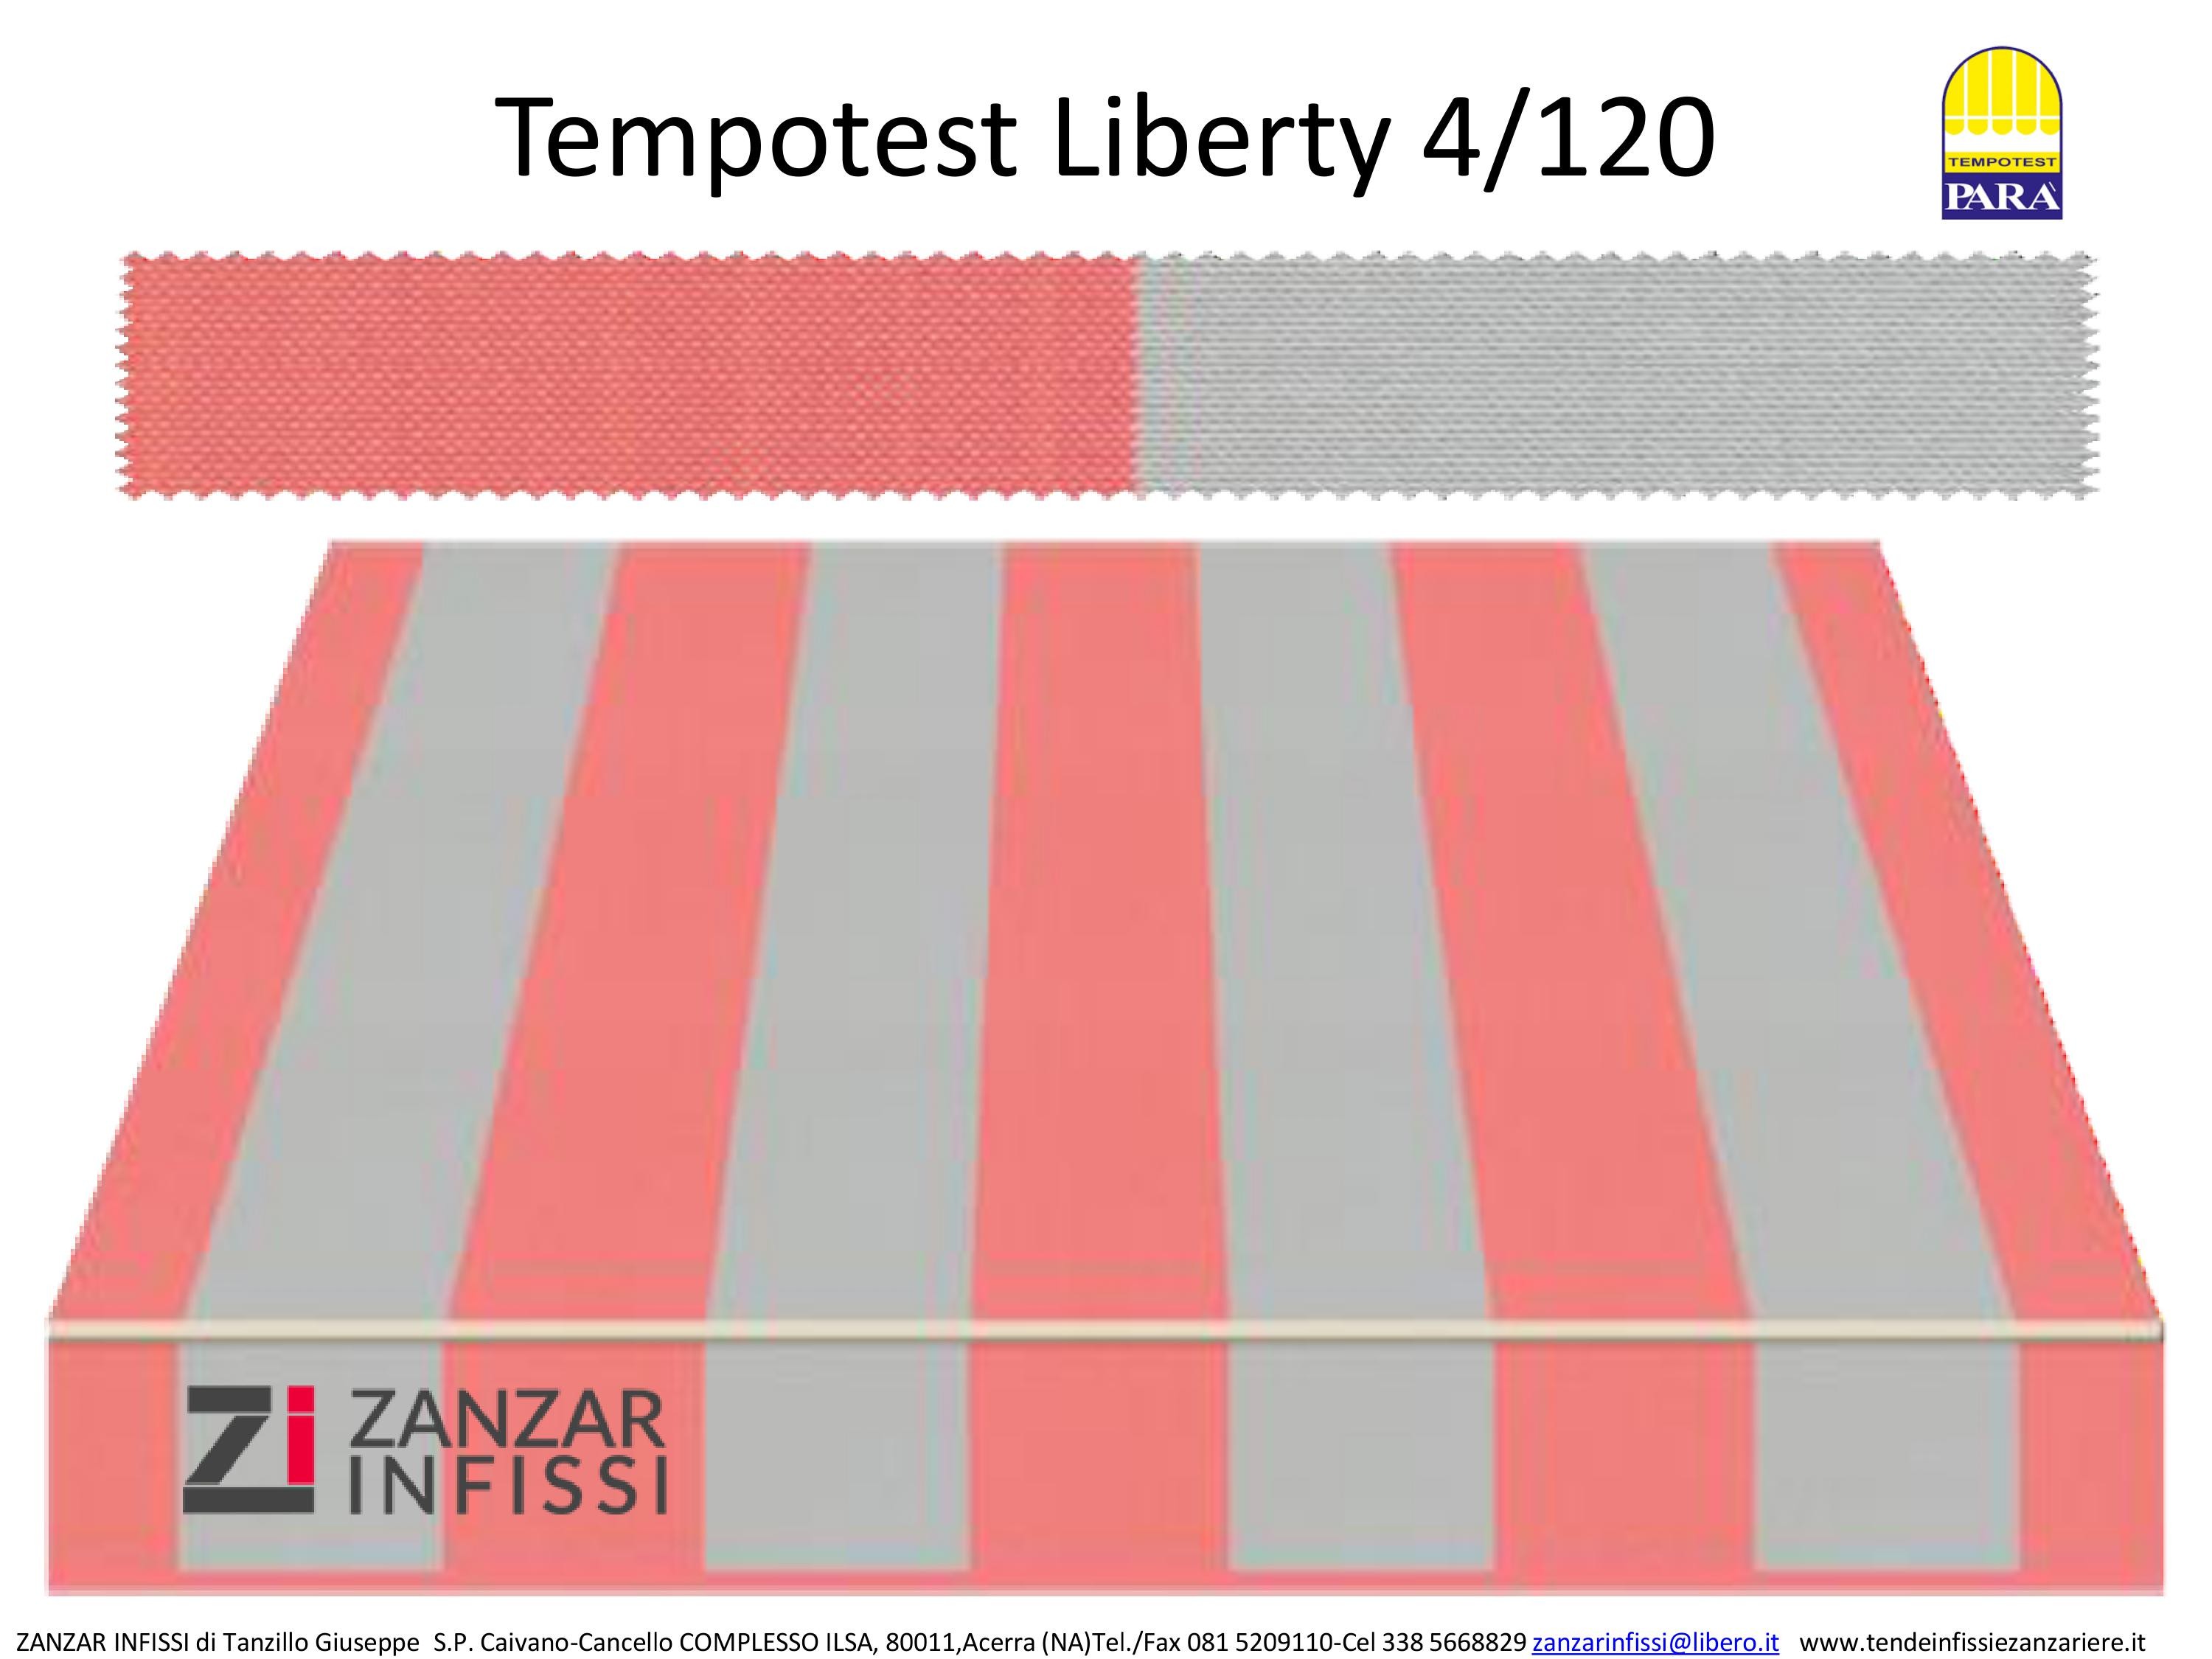 Tempotest Liberty 4/120